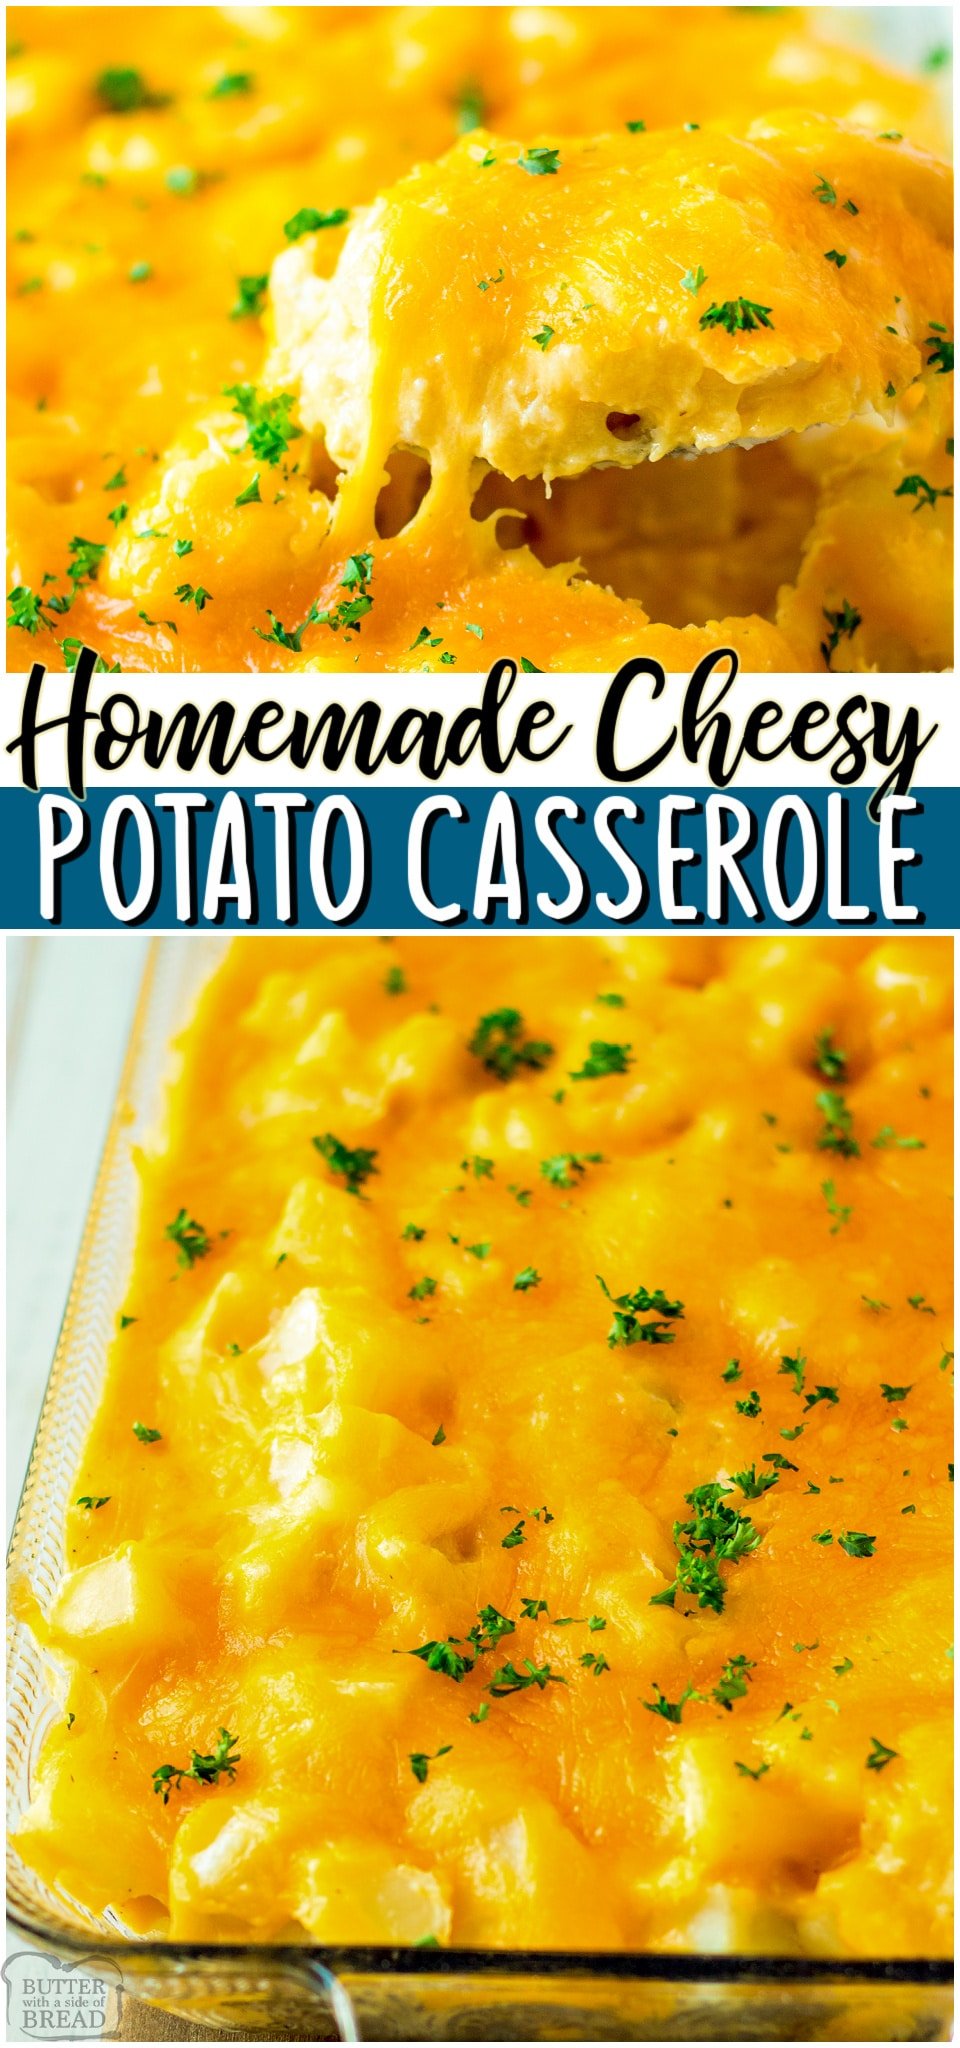 Creamy Cheesy Potato Casserole made with russet potatoes, butter, milk, flour, and cheese, giving you the perfect cheesy potatoes recipe! Homemade funeral potatoes perfect for holidays, Sunday dinner, or any occasion.